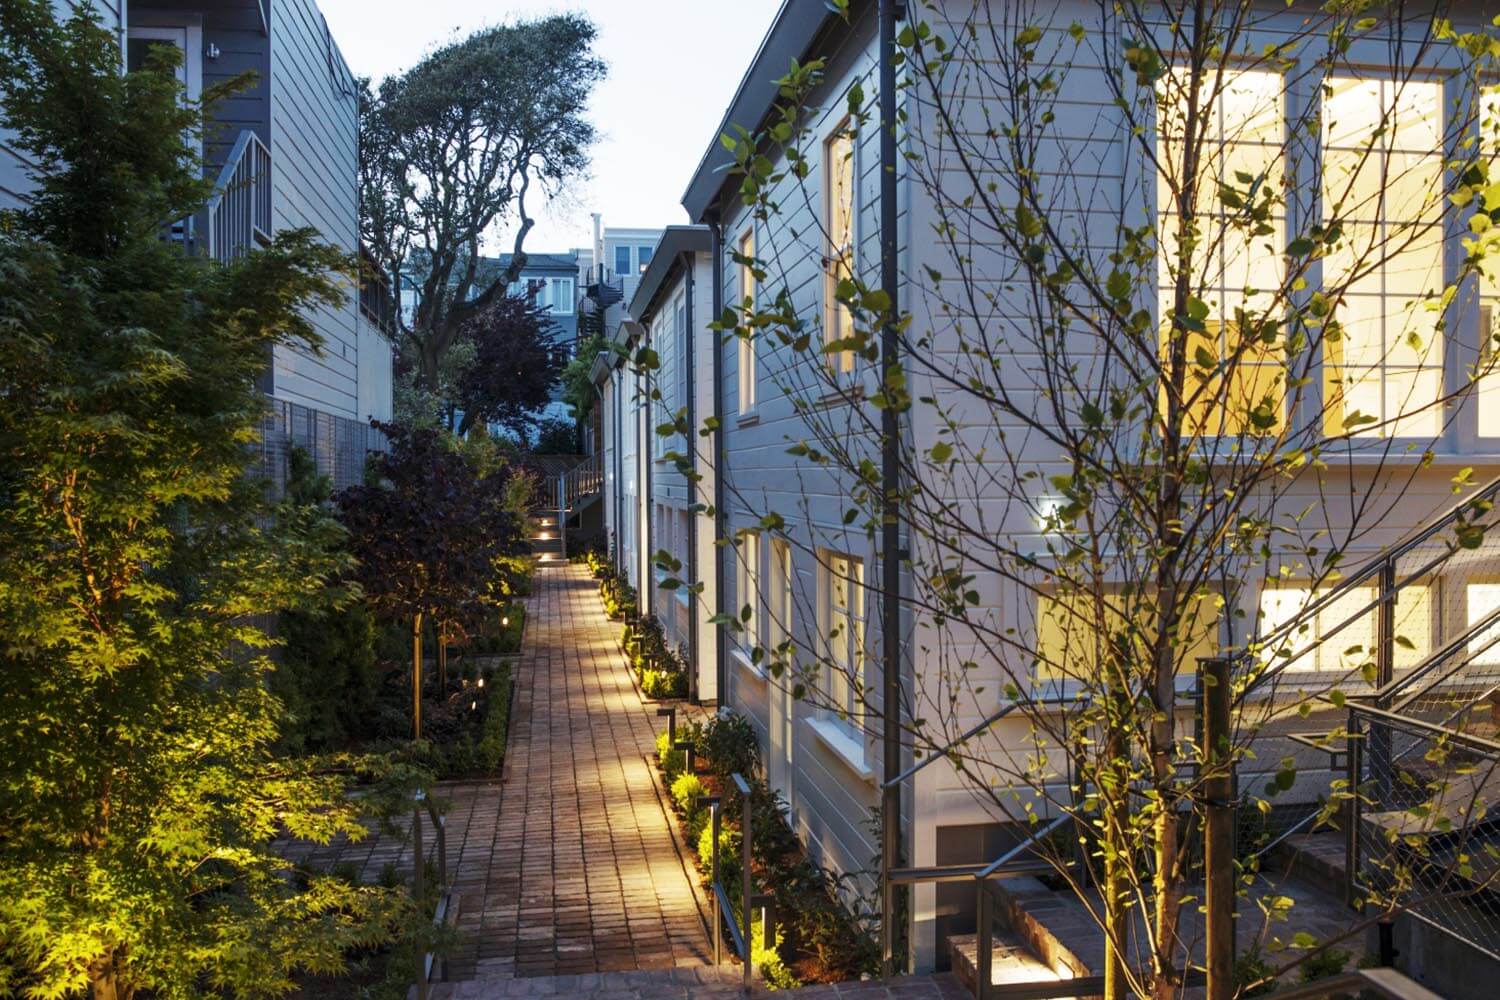 Exterior view of Filbert Cottages in San Francisco, CA showing brick pathway